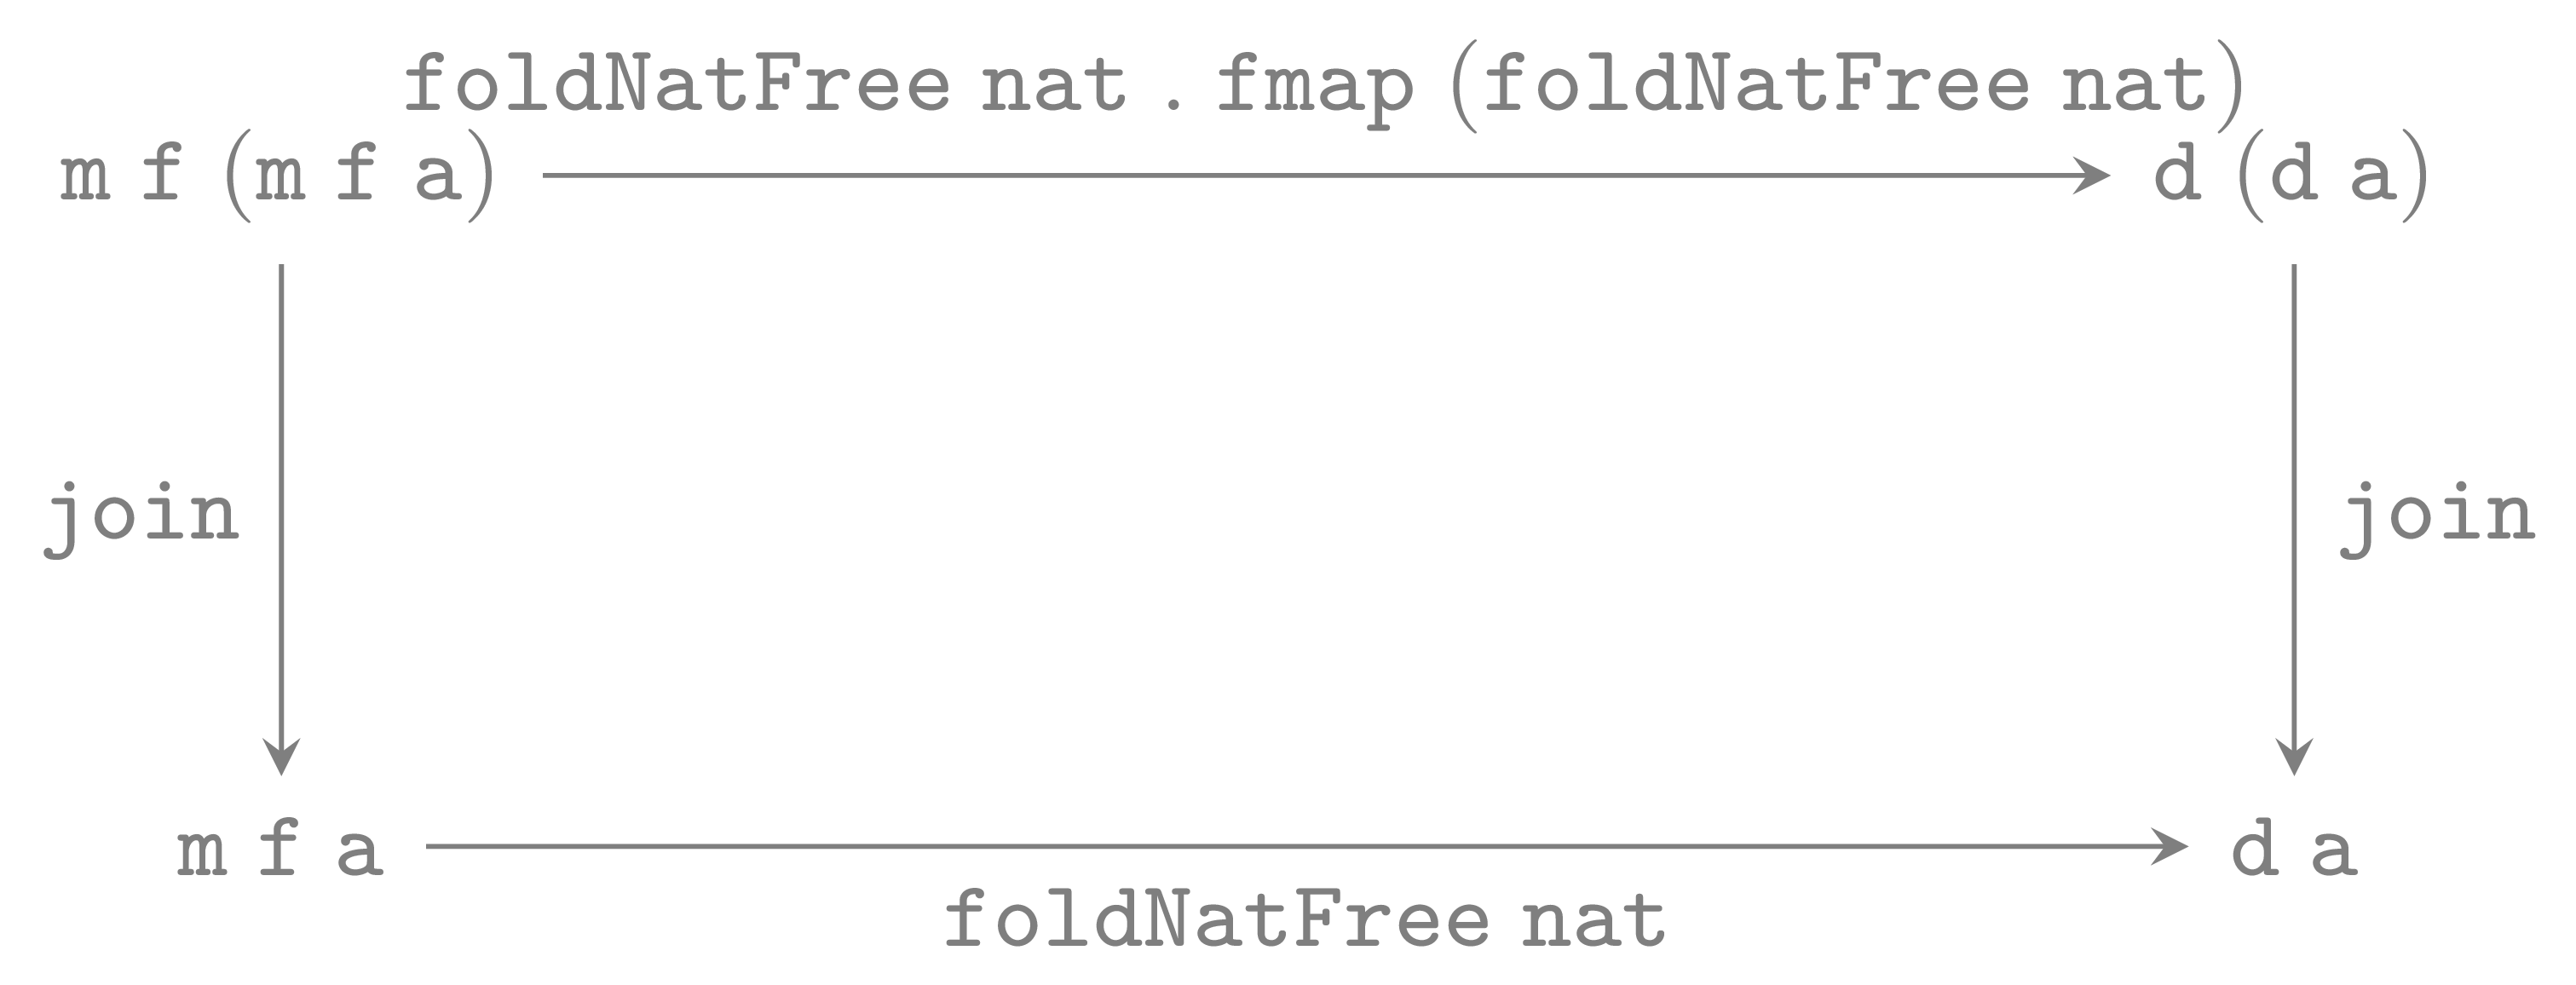 foldNatFree - monad morphism: the join law